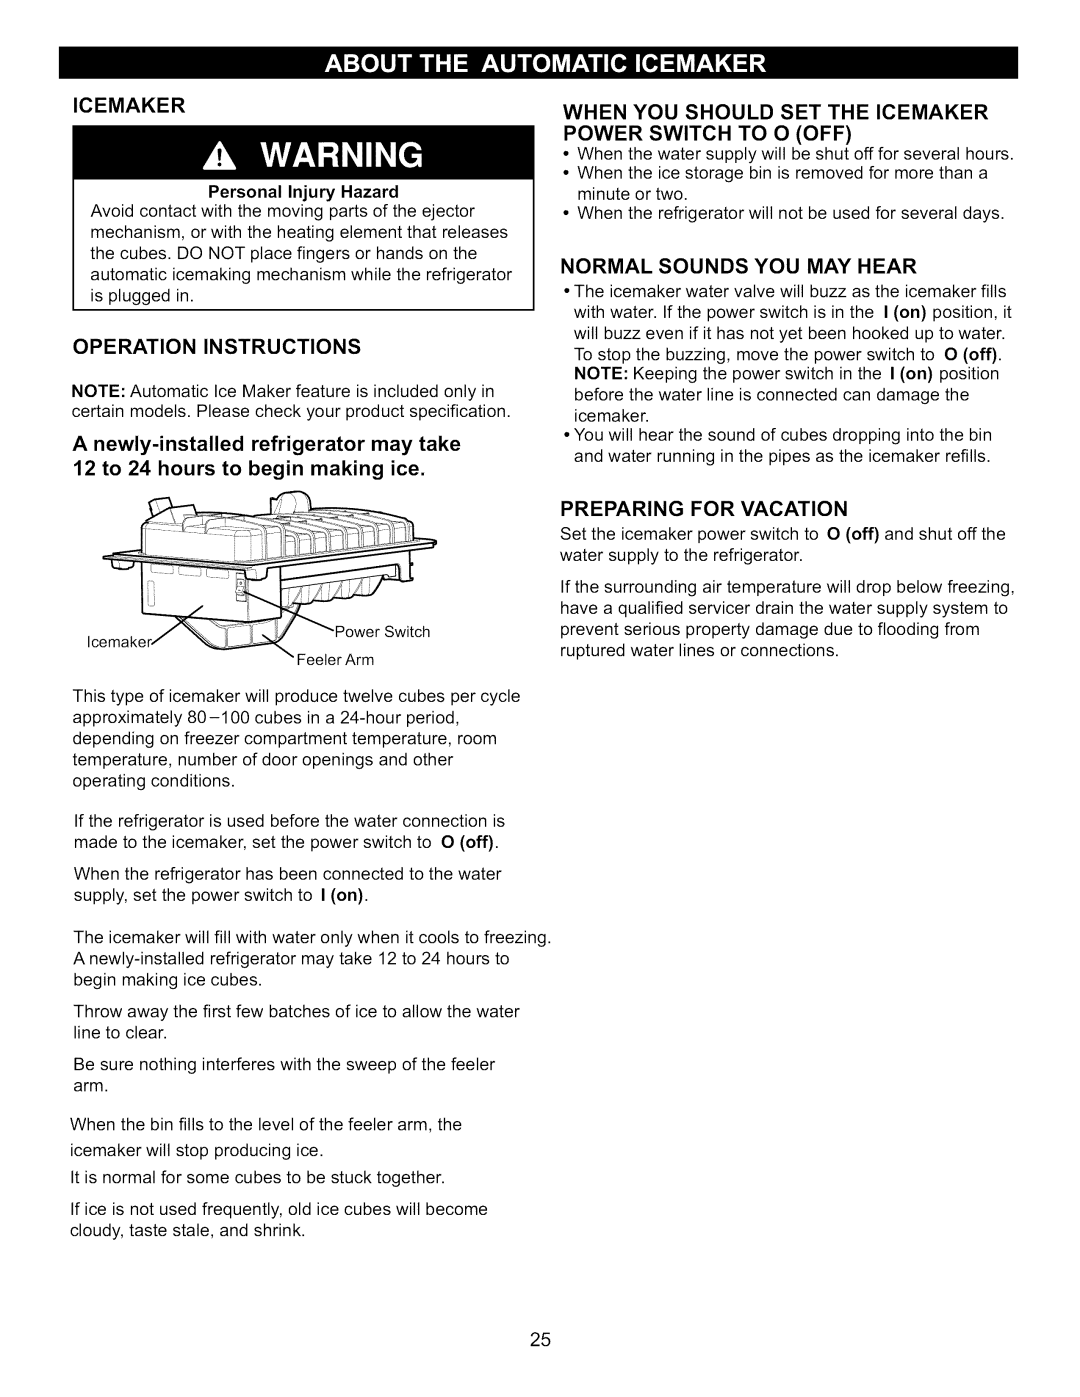 Kenmore 795.7130-K manual Operation Instructions, When You Should Set The Icemaker, Power Switch To O Off 